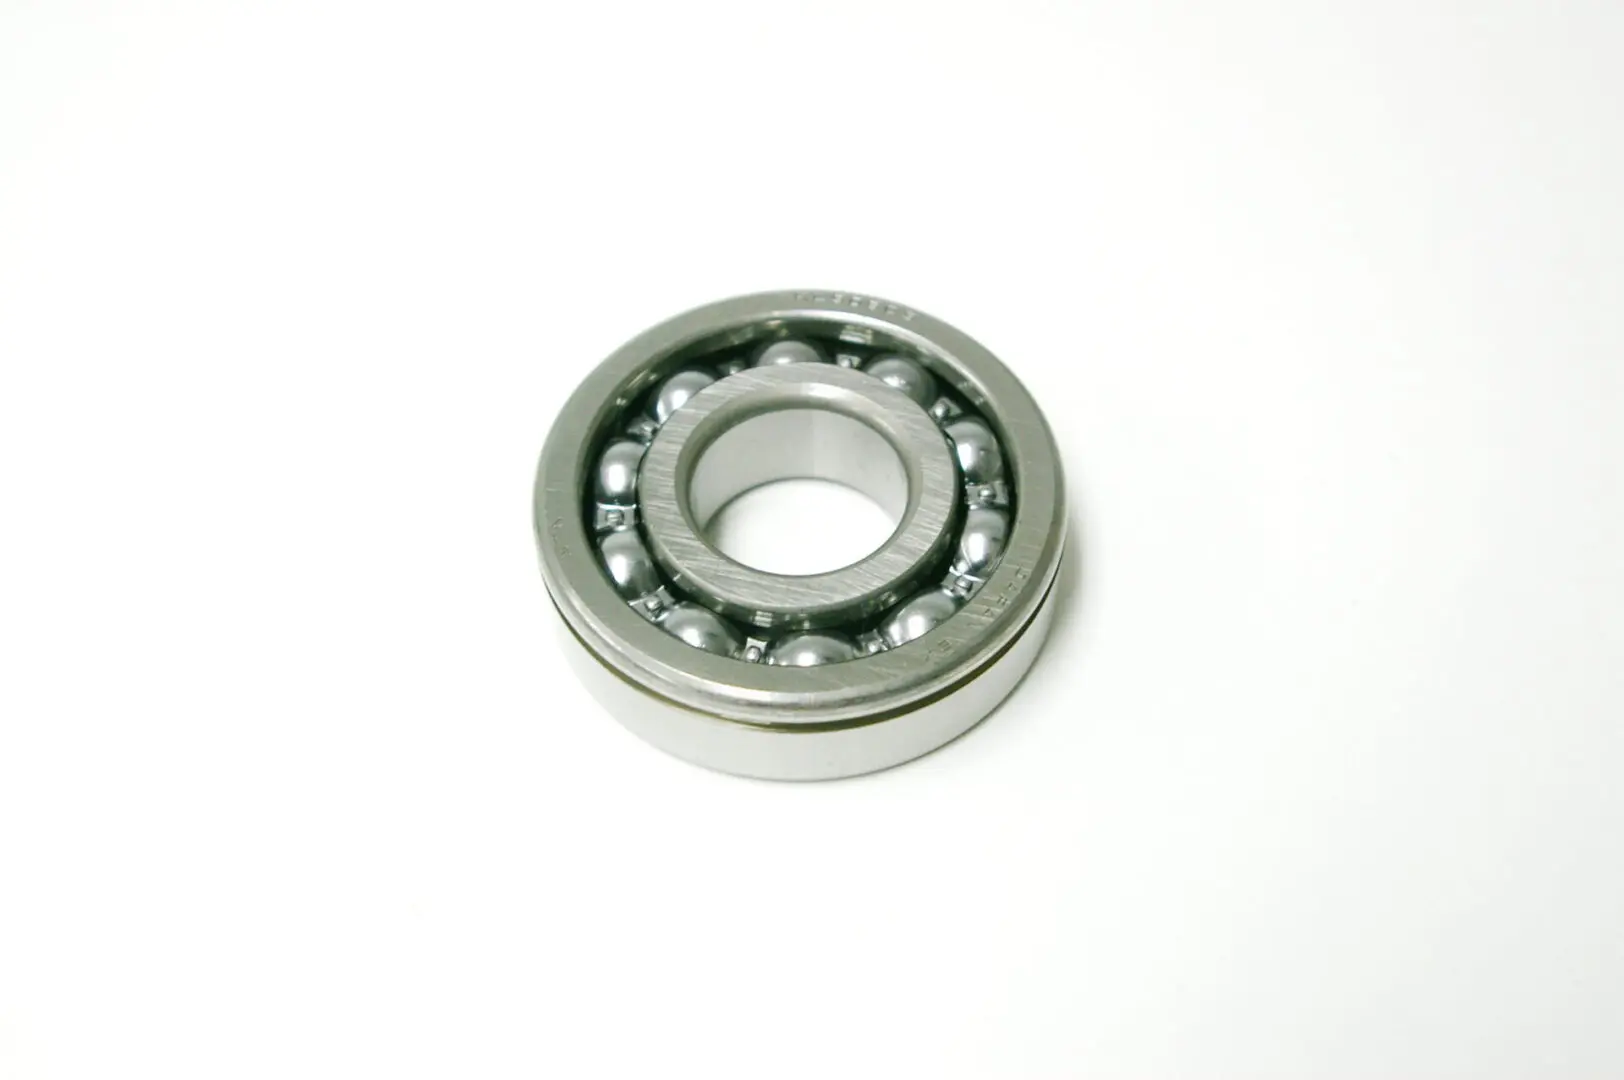 A Crankshaft Bearing 10 Ball Max Type, Part# 91-5712 on a white background.